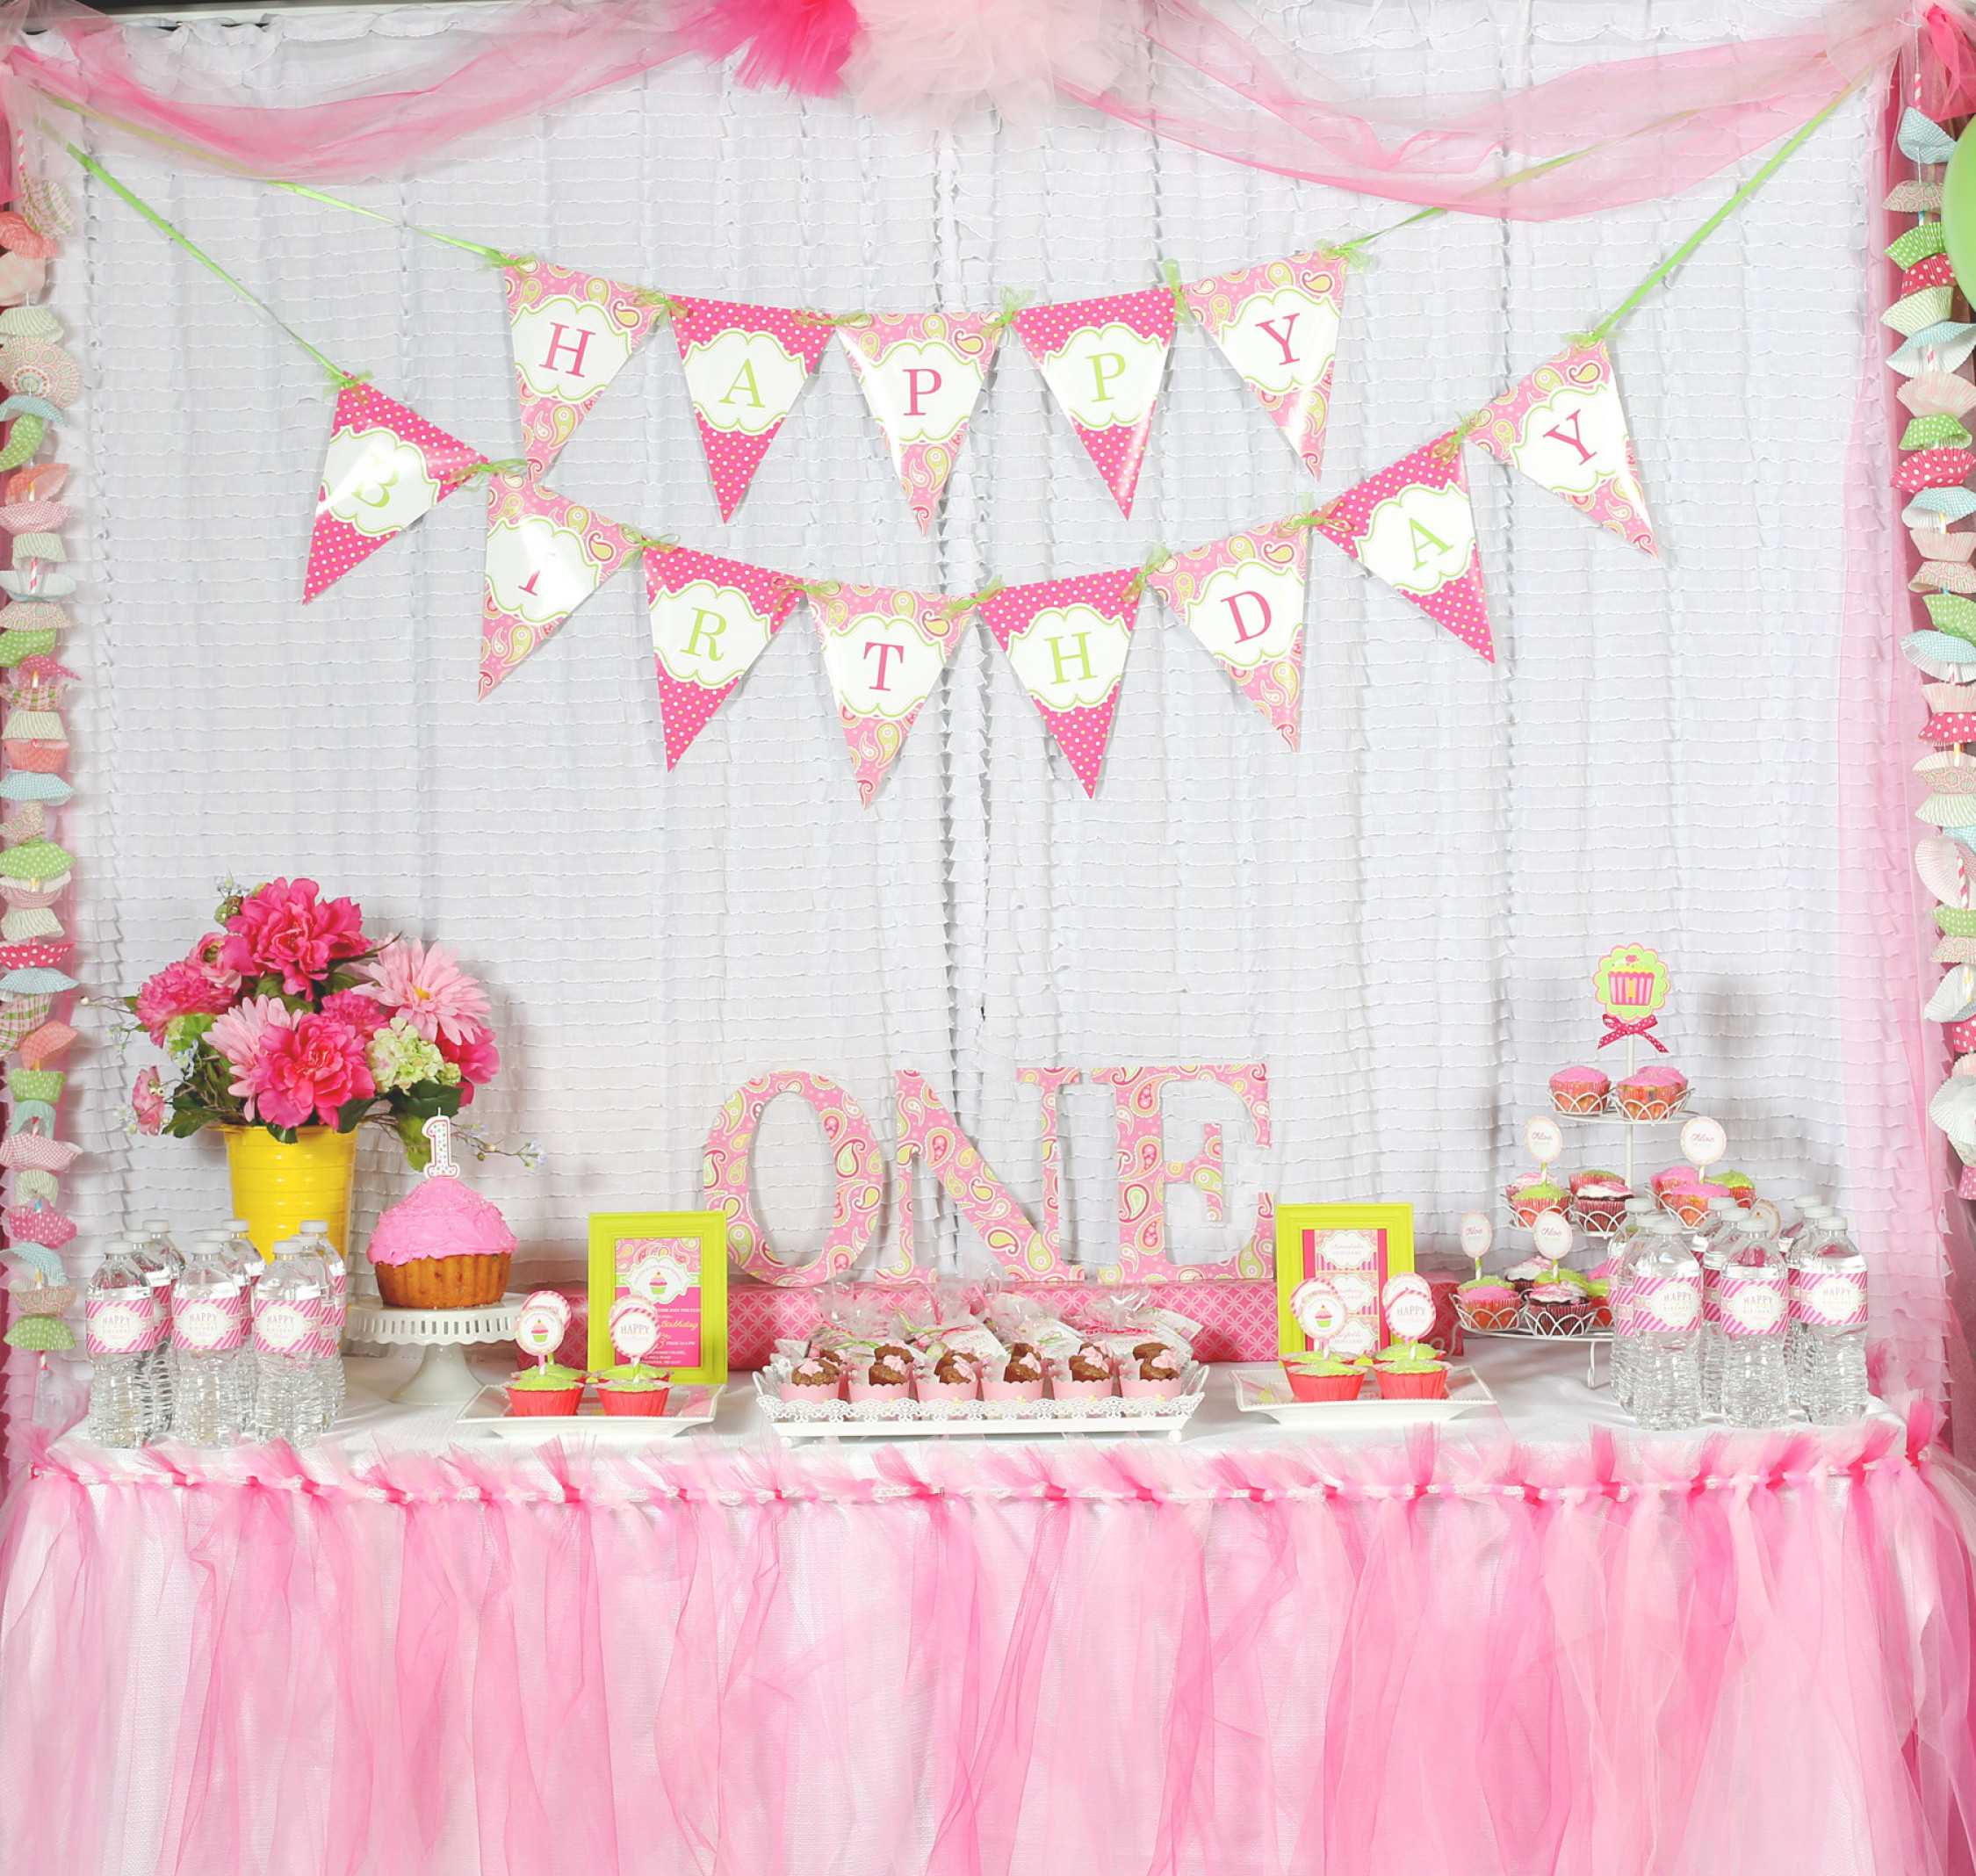 Girl 1St Birthday Party Ideas
 A Cupcake Themed 1st Birthday party with Paisley and Polka